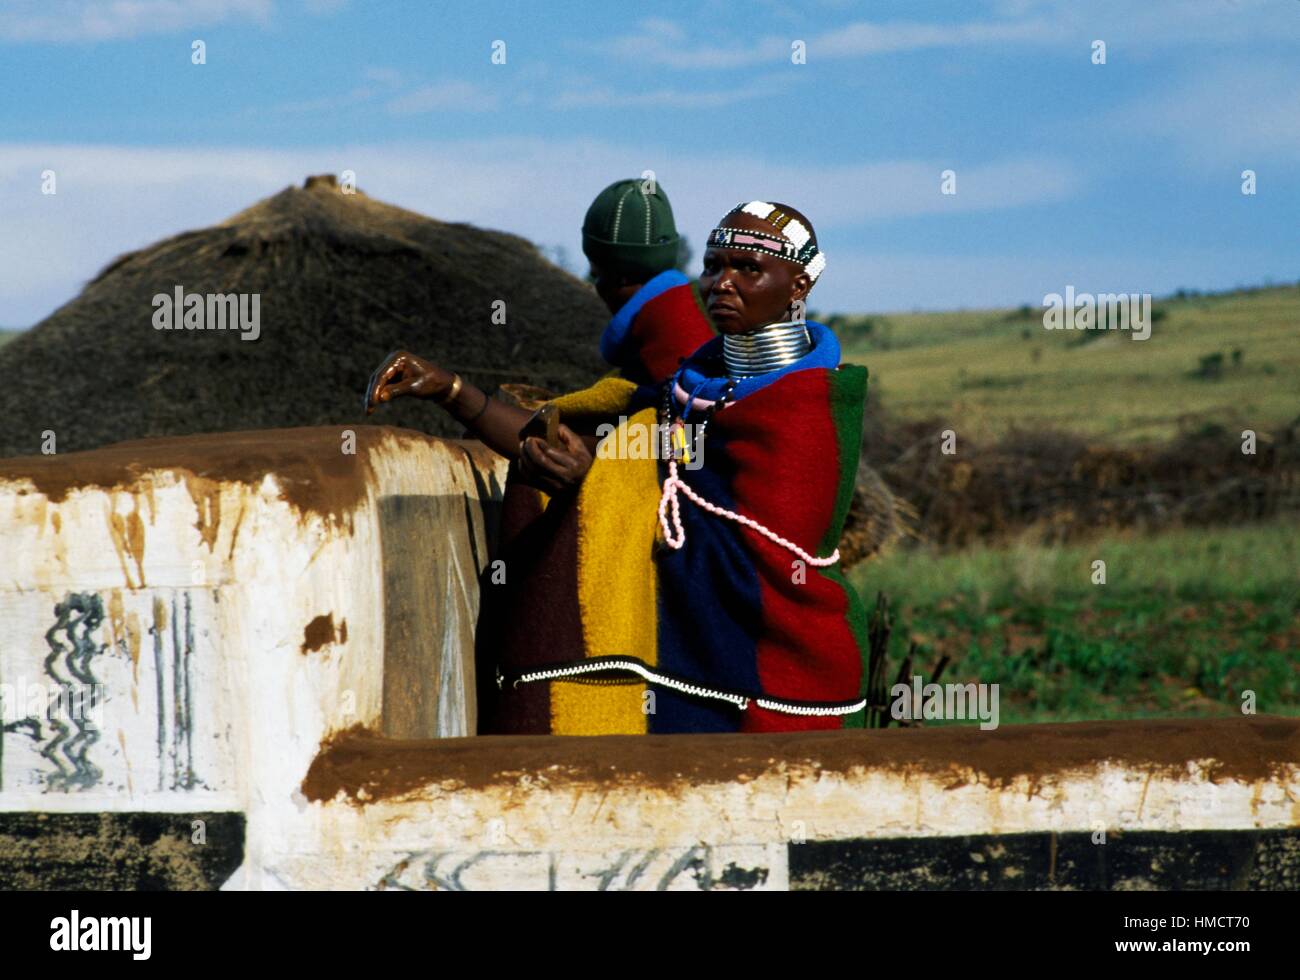 A Ndebele woman and a man decorating a rondavel (traditional round or oval house) in a village, South Africa. Stock Photo